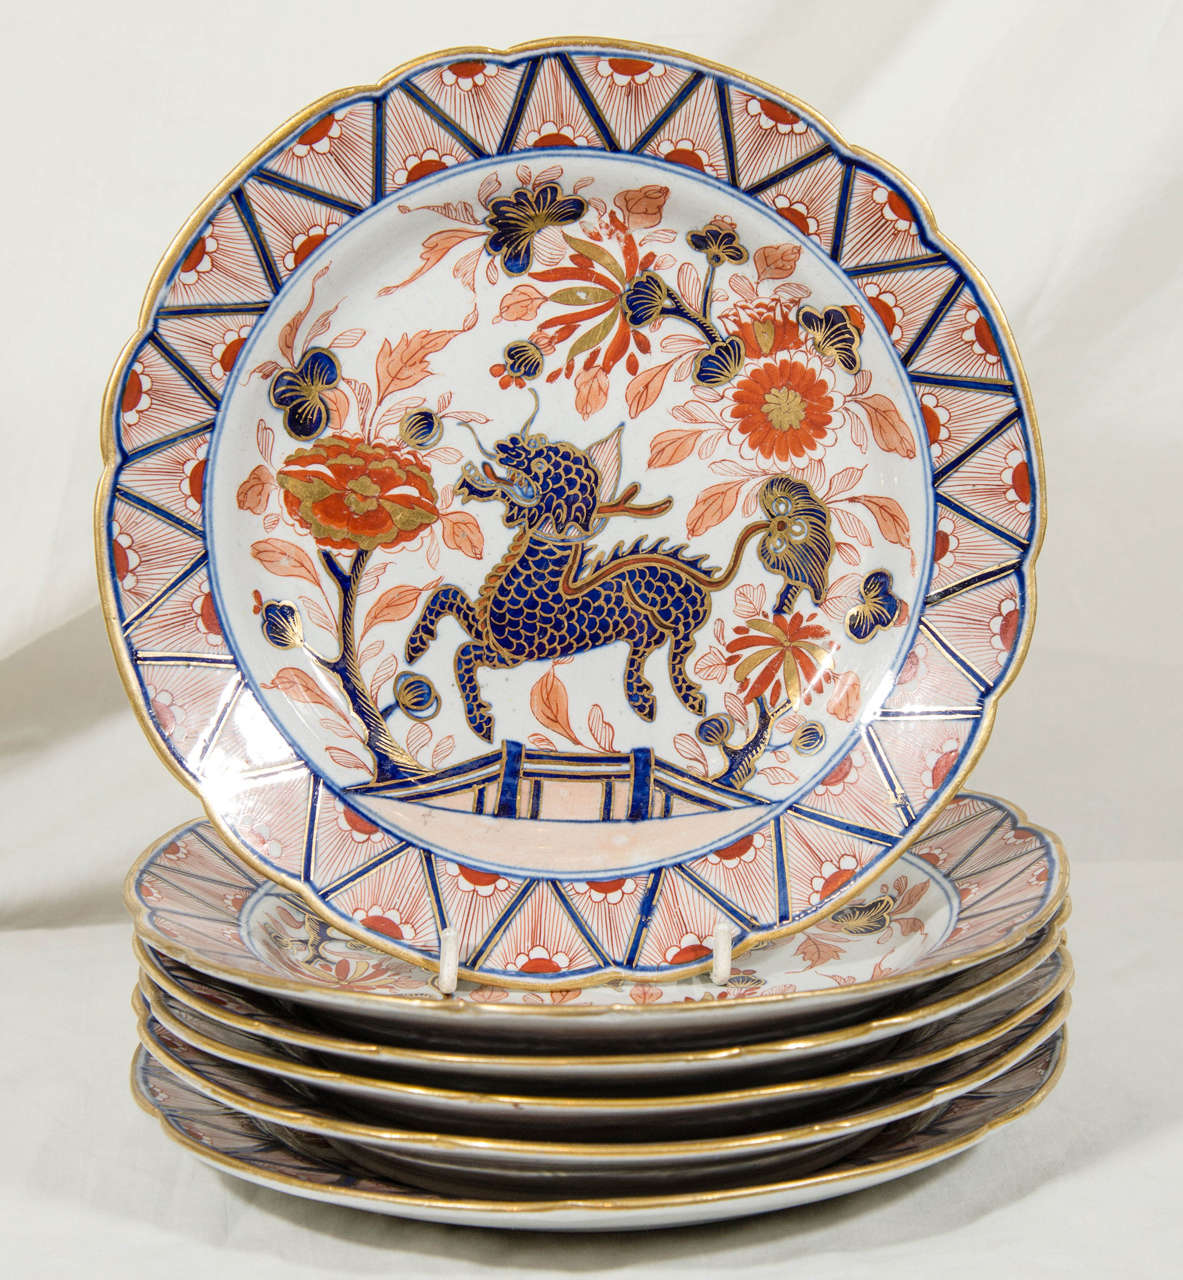 An Imari inspired pattern showing a dragon flying through a flowering garden.
Made by Turner, the inventor of ironstone*, the dishes are marked 